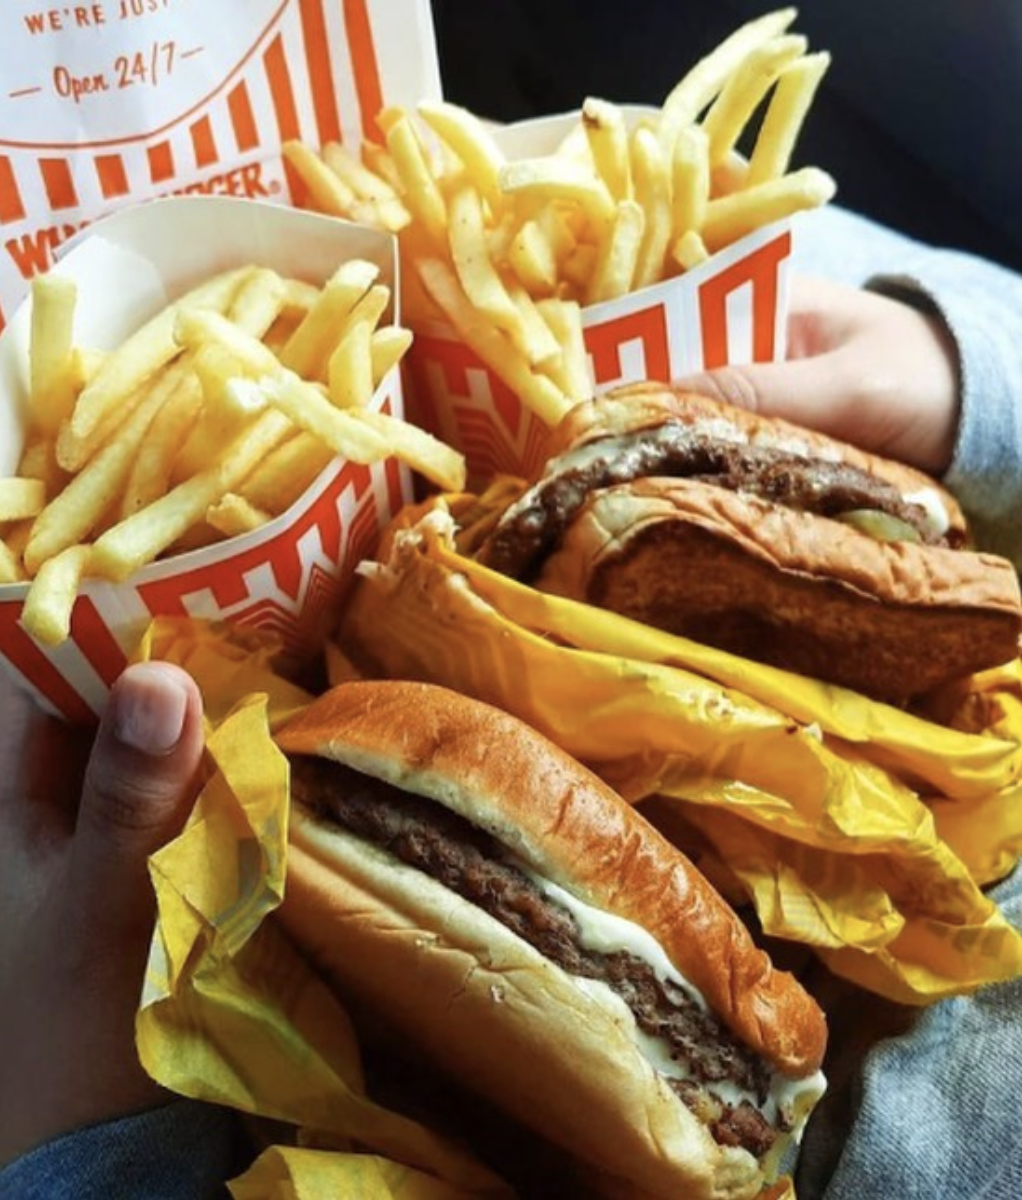 A Whataburger classic: fries and burgers.